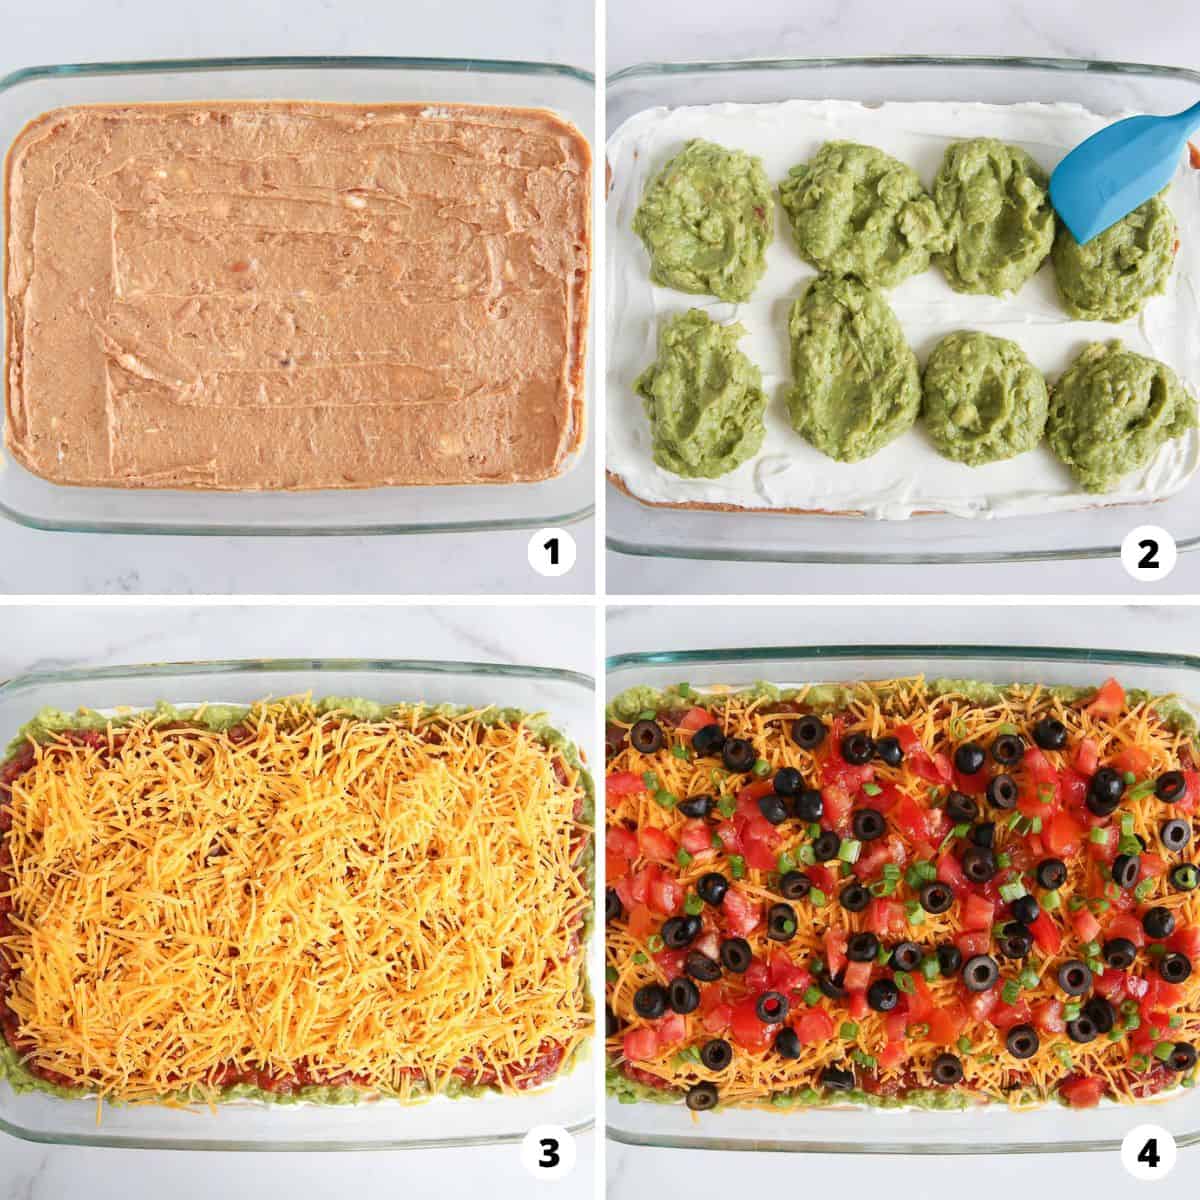 Showing how to make 7 layer dip in a 4 step collage.